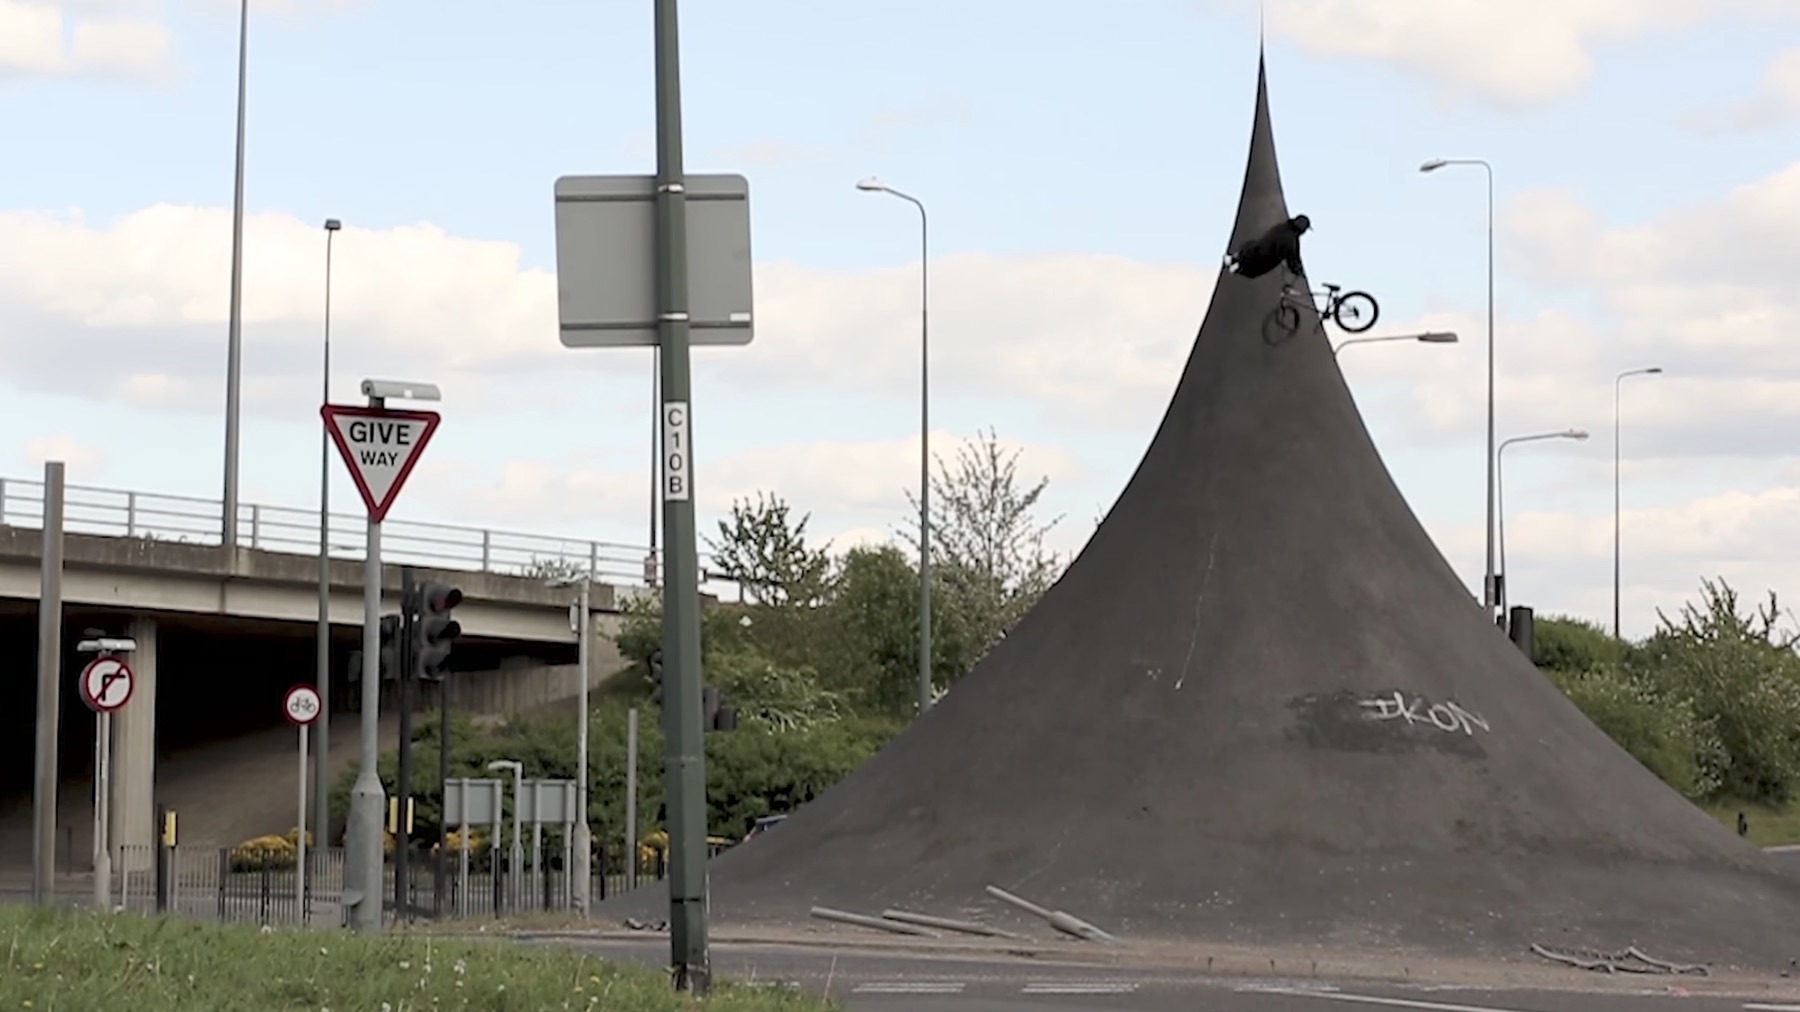 SHADOW CONSPIRACY: Ollie Shields - Welcome to the Team